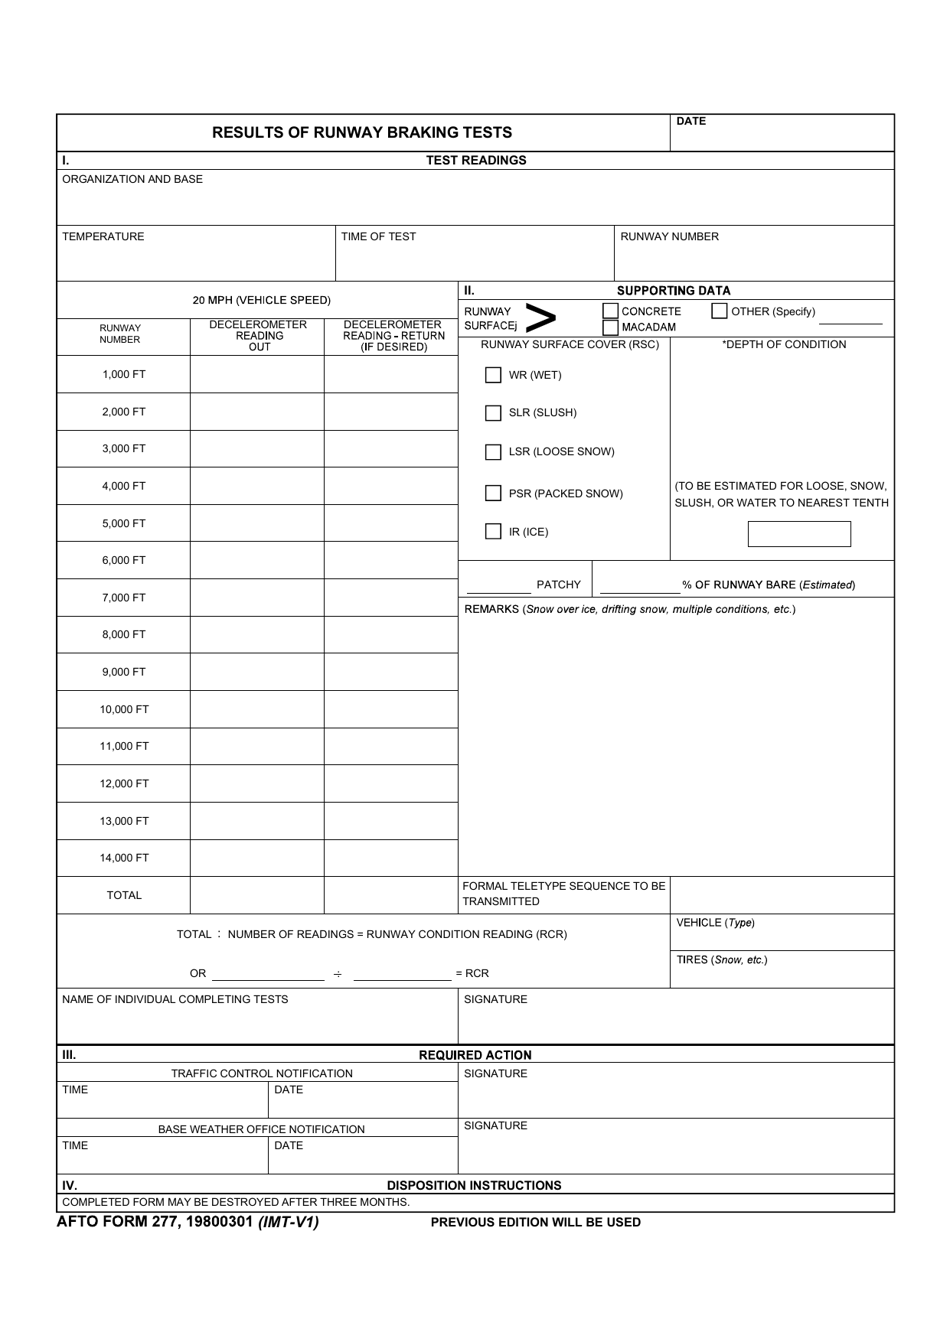 AFTO Form 277 Results of Runway Braking Tests, Page 1